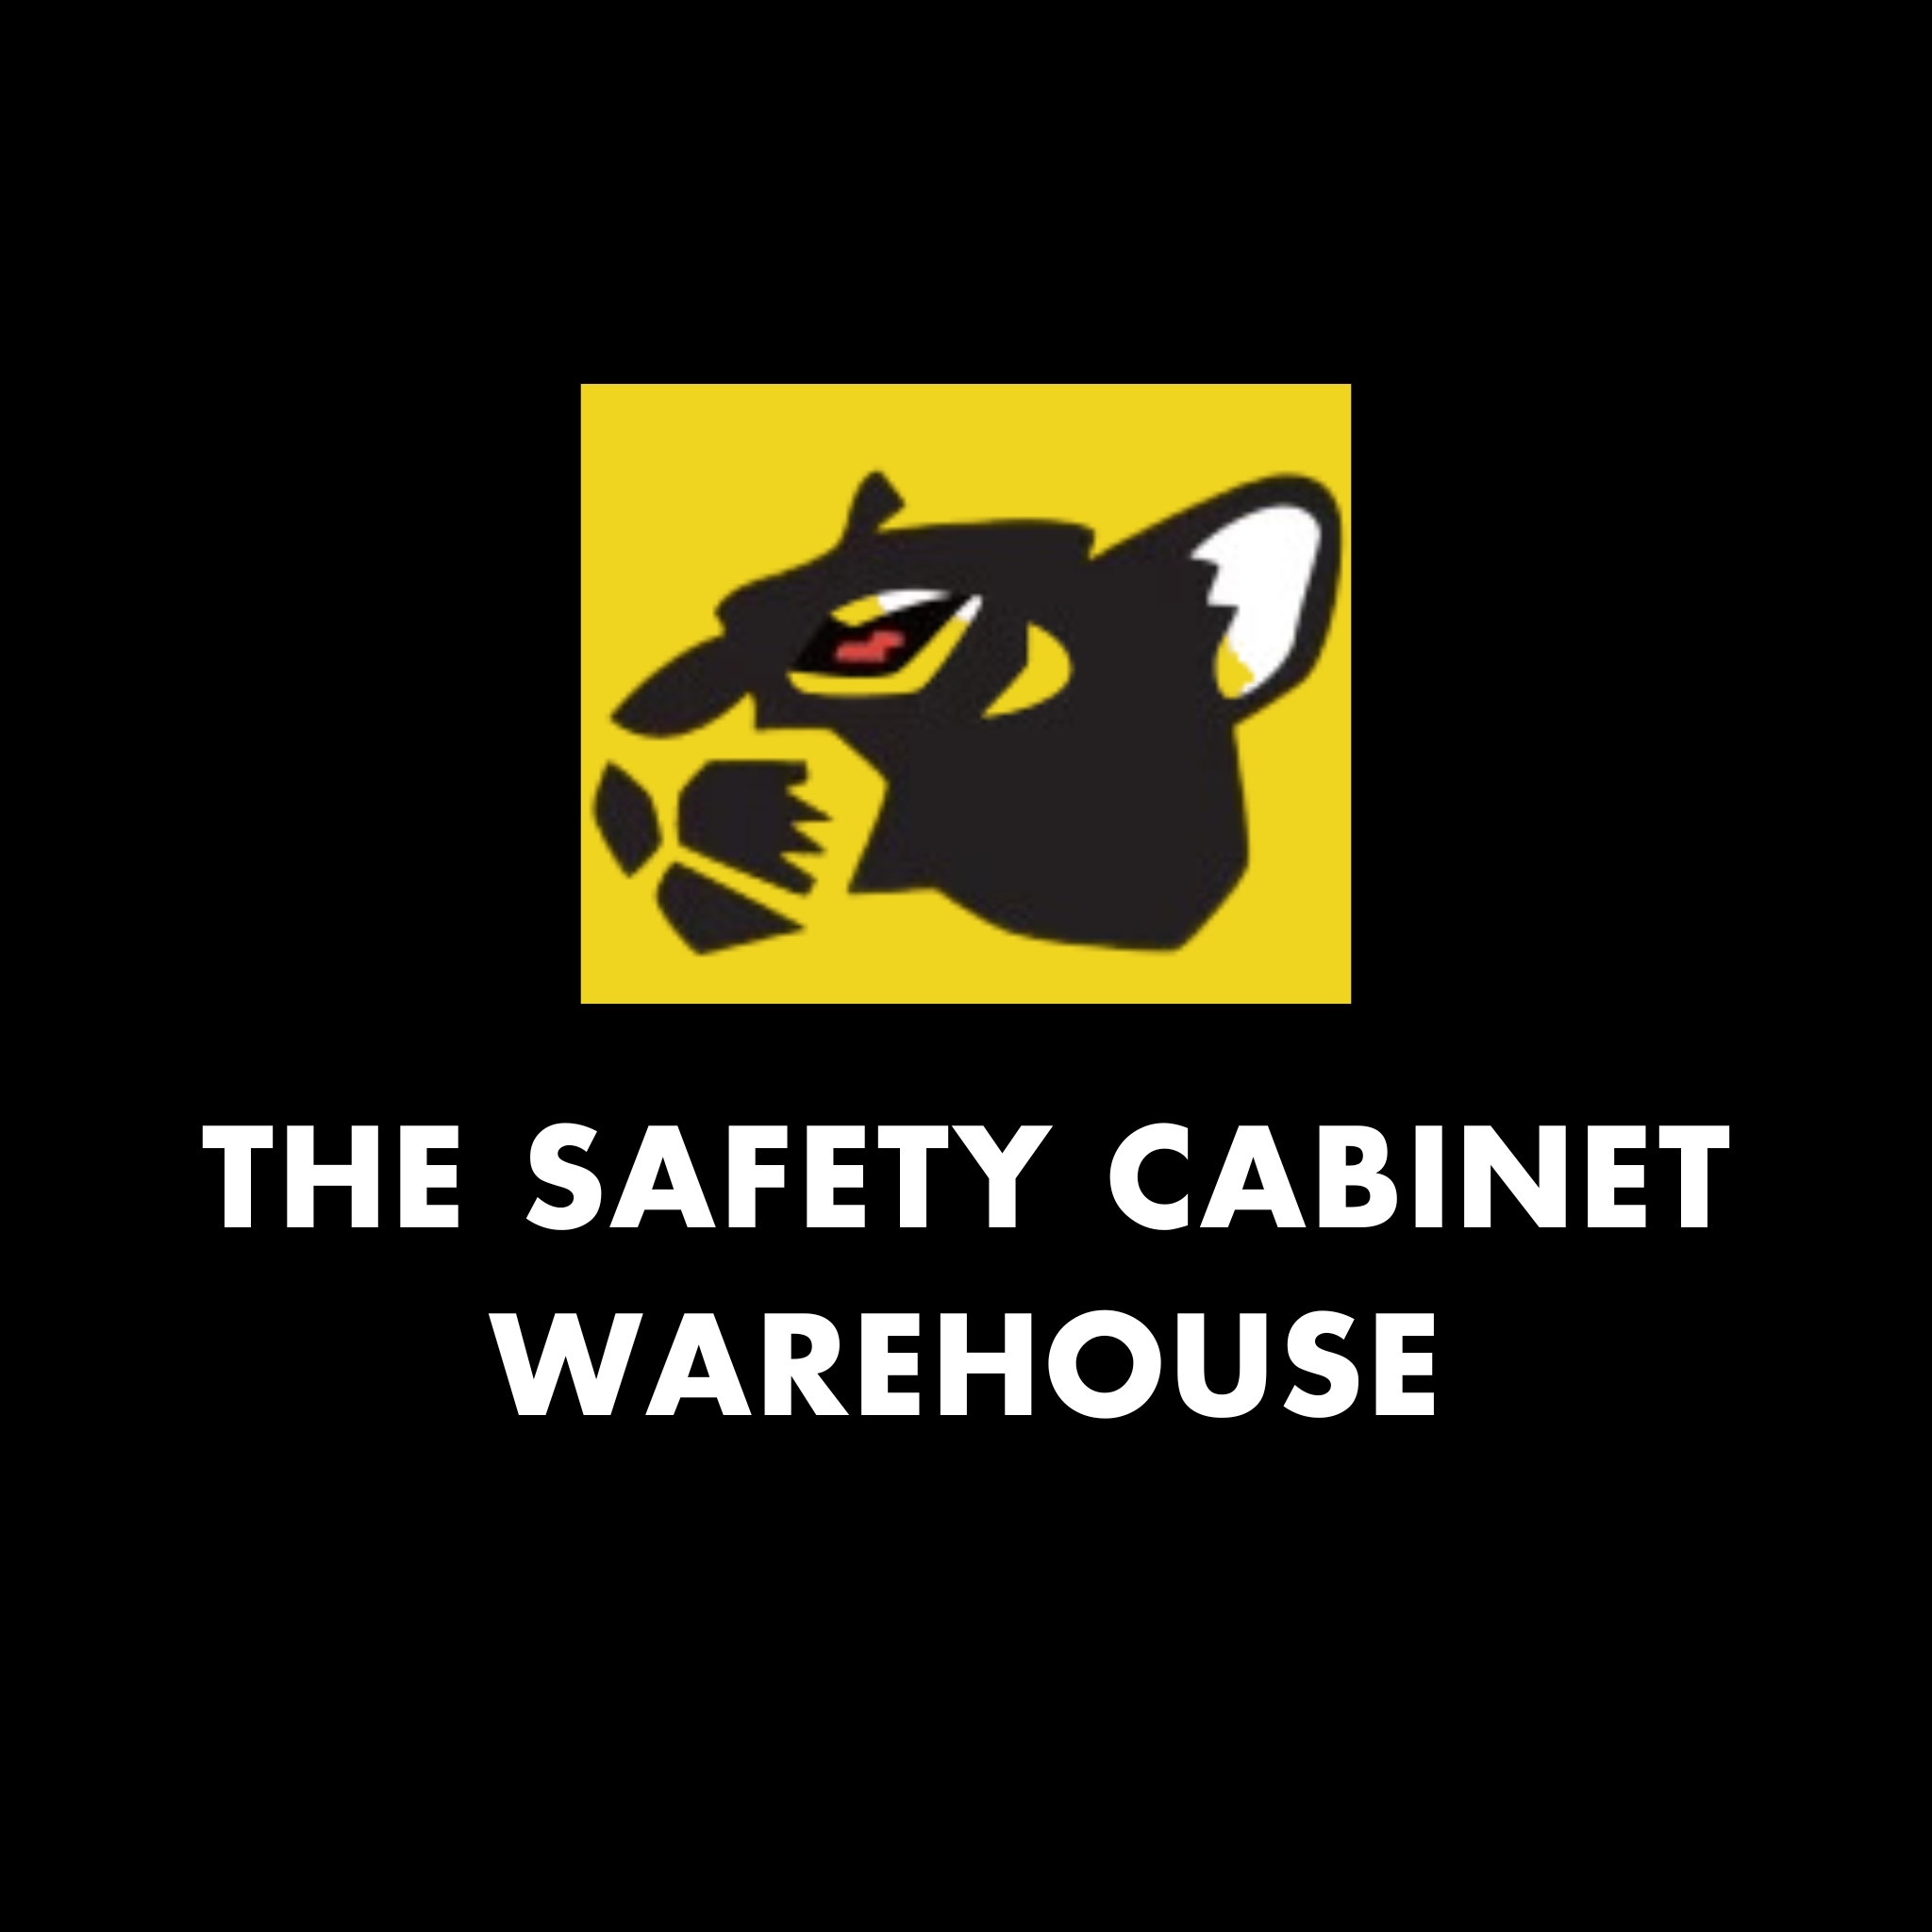 The Safety Cabinet Warehouse